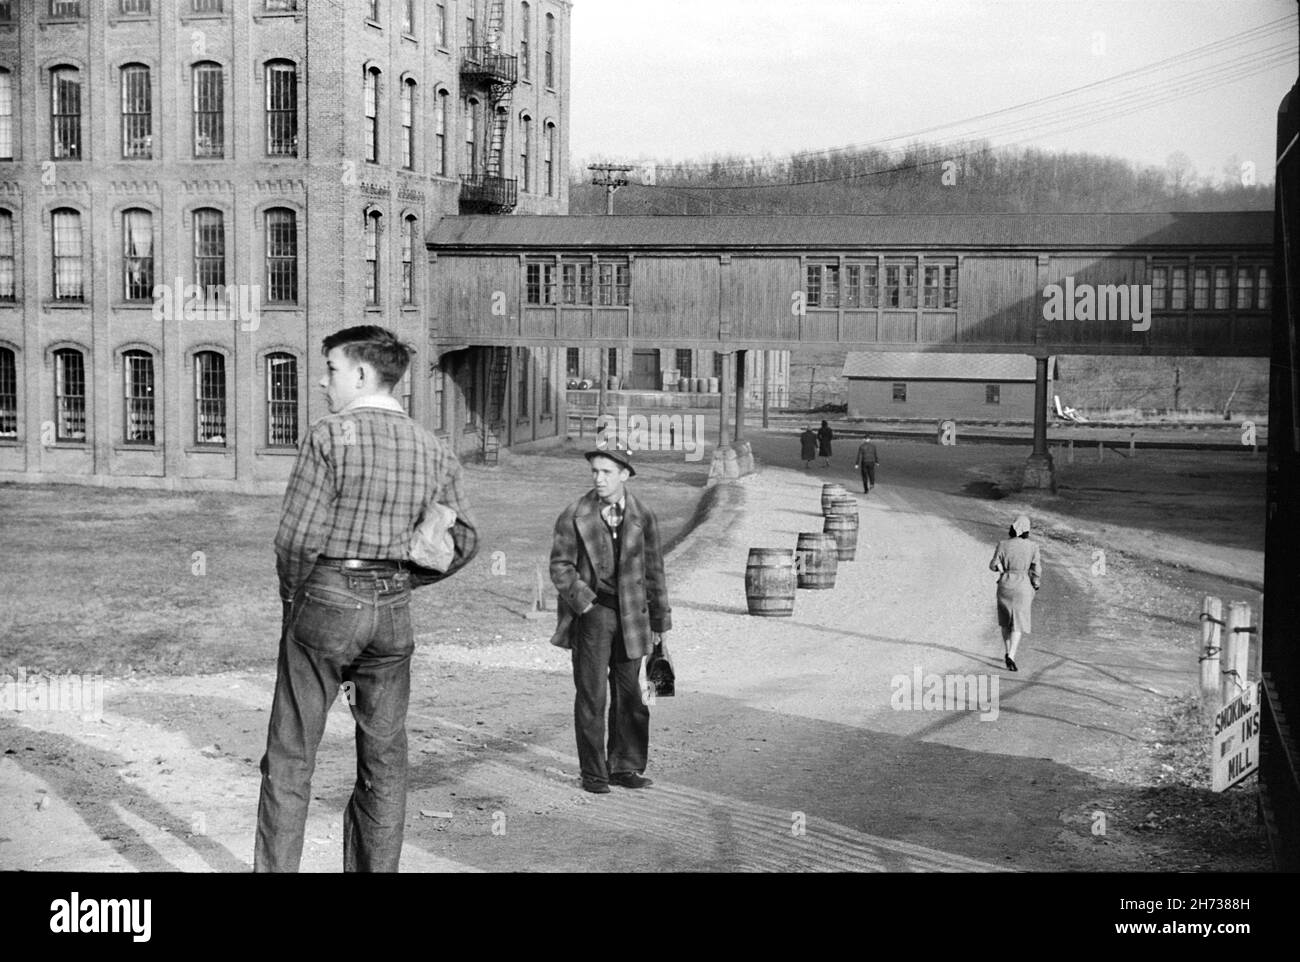 Workers arriving at change of Shift, Penomah Mills Inc., Taftville, Connecticut, USA, Jack Delano, U.S. Farm Security Administration, U.S. Office of War Information Photograph Collection, November 1940 Stock Photo